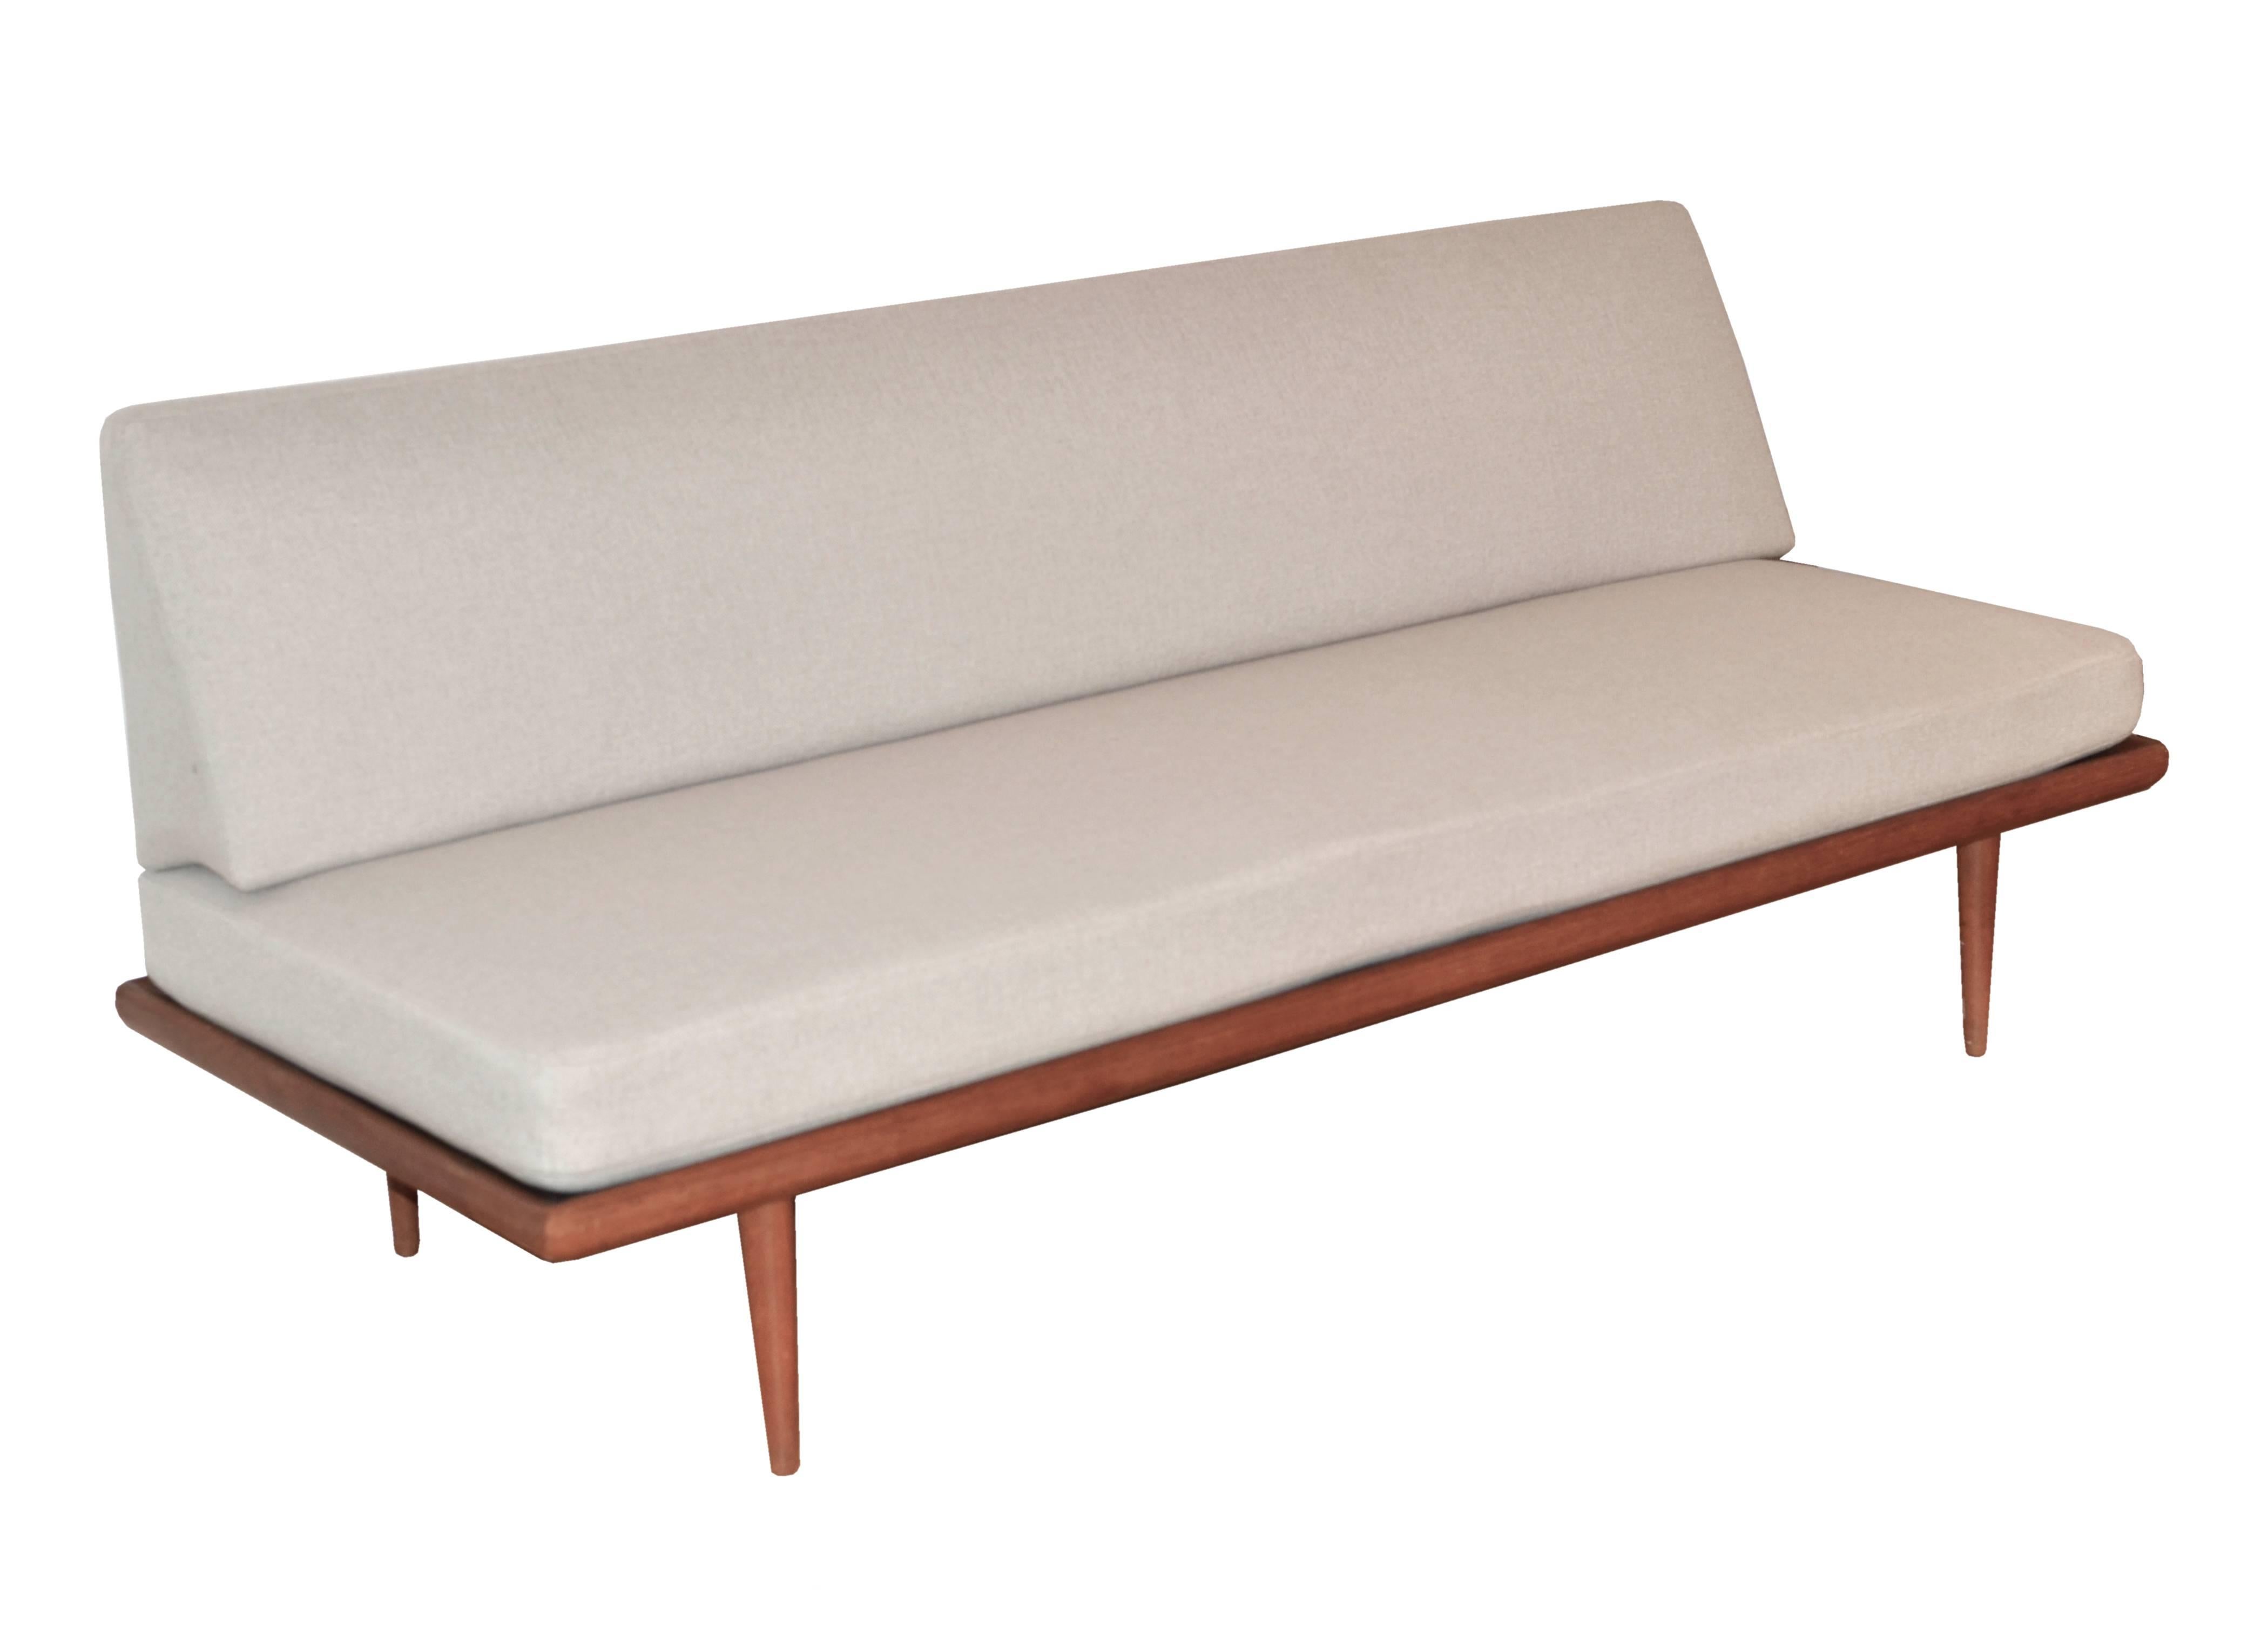 This Minerva sofa and daybed was designed by Peter Hvidt & Orla Mølgaard-Nielsen and produced in the 1960s by France & Son in Denmark. It is made from solid teak and features a new upholstery and off-white fabric (a spare set in different